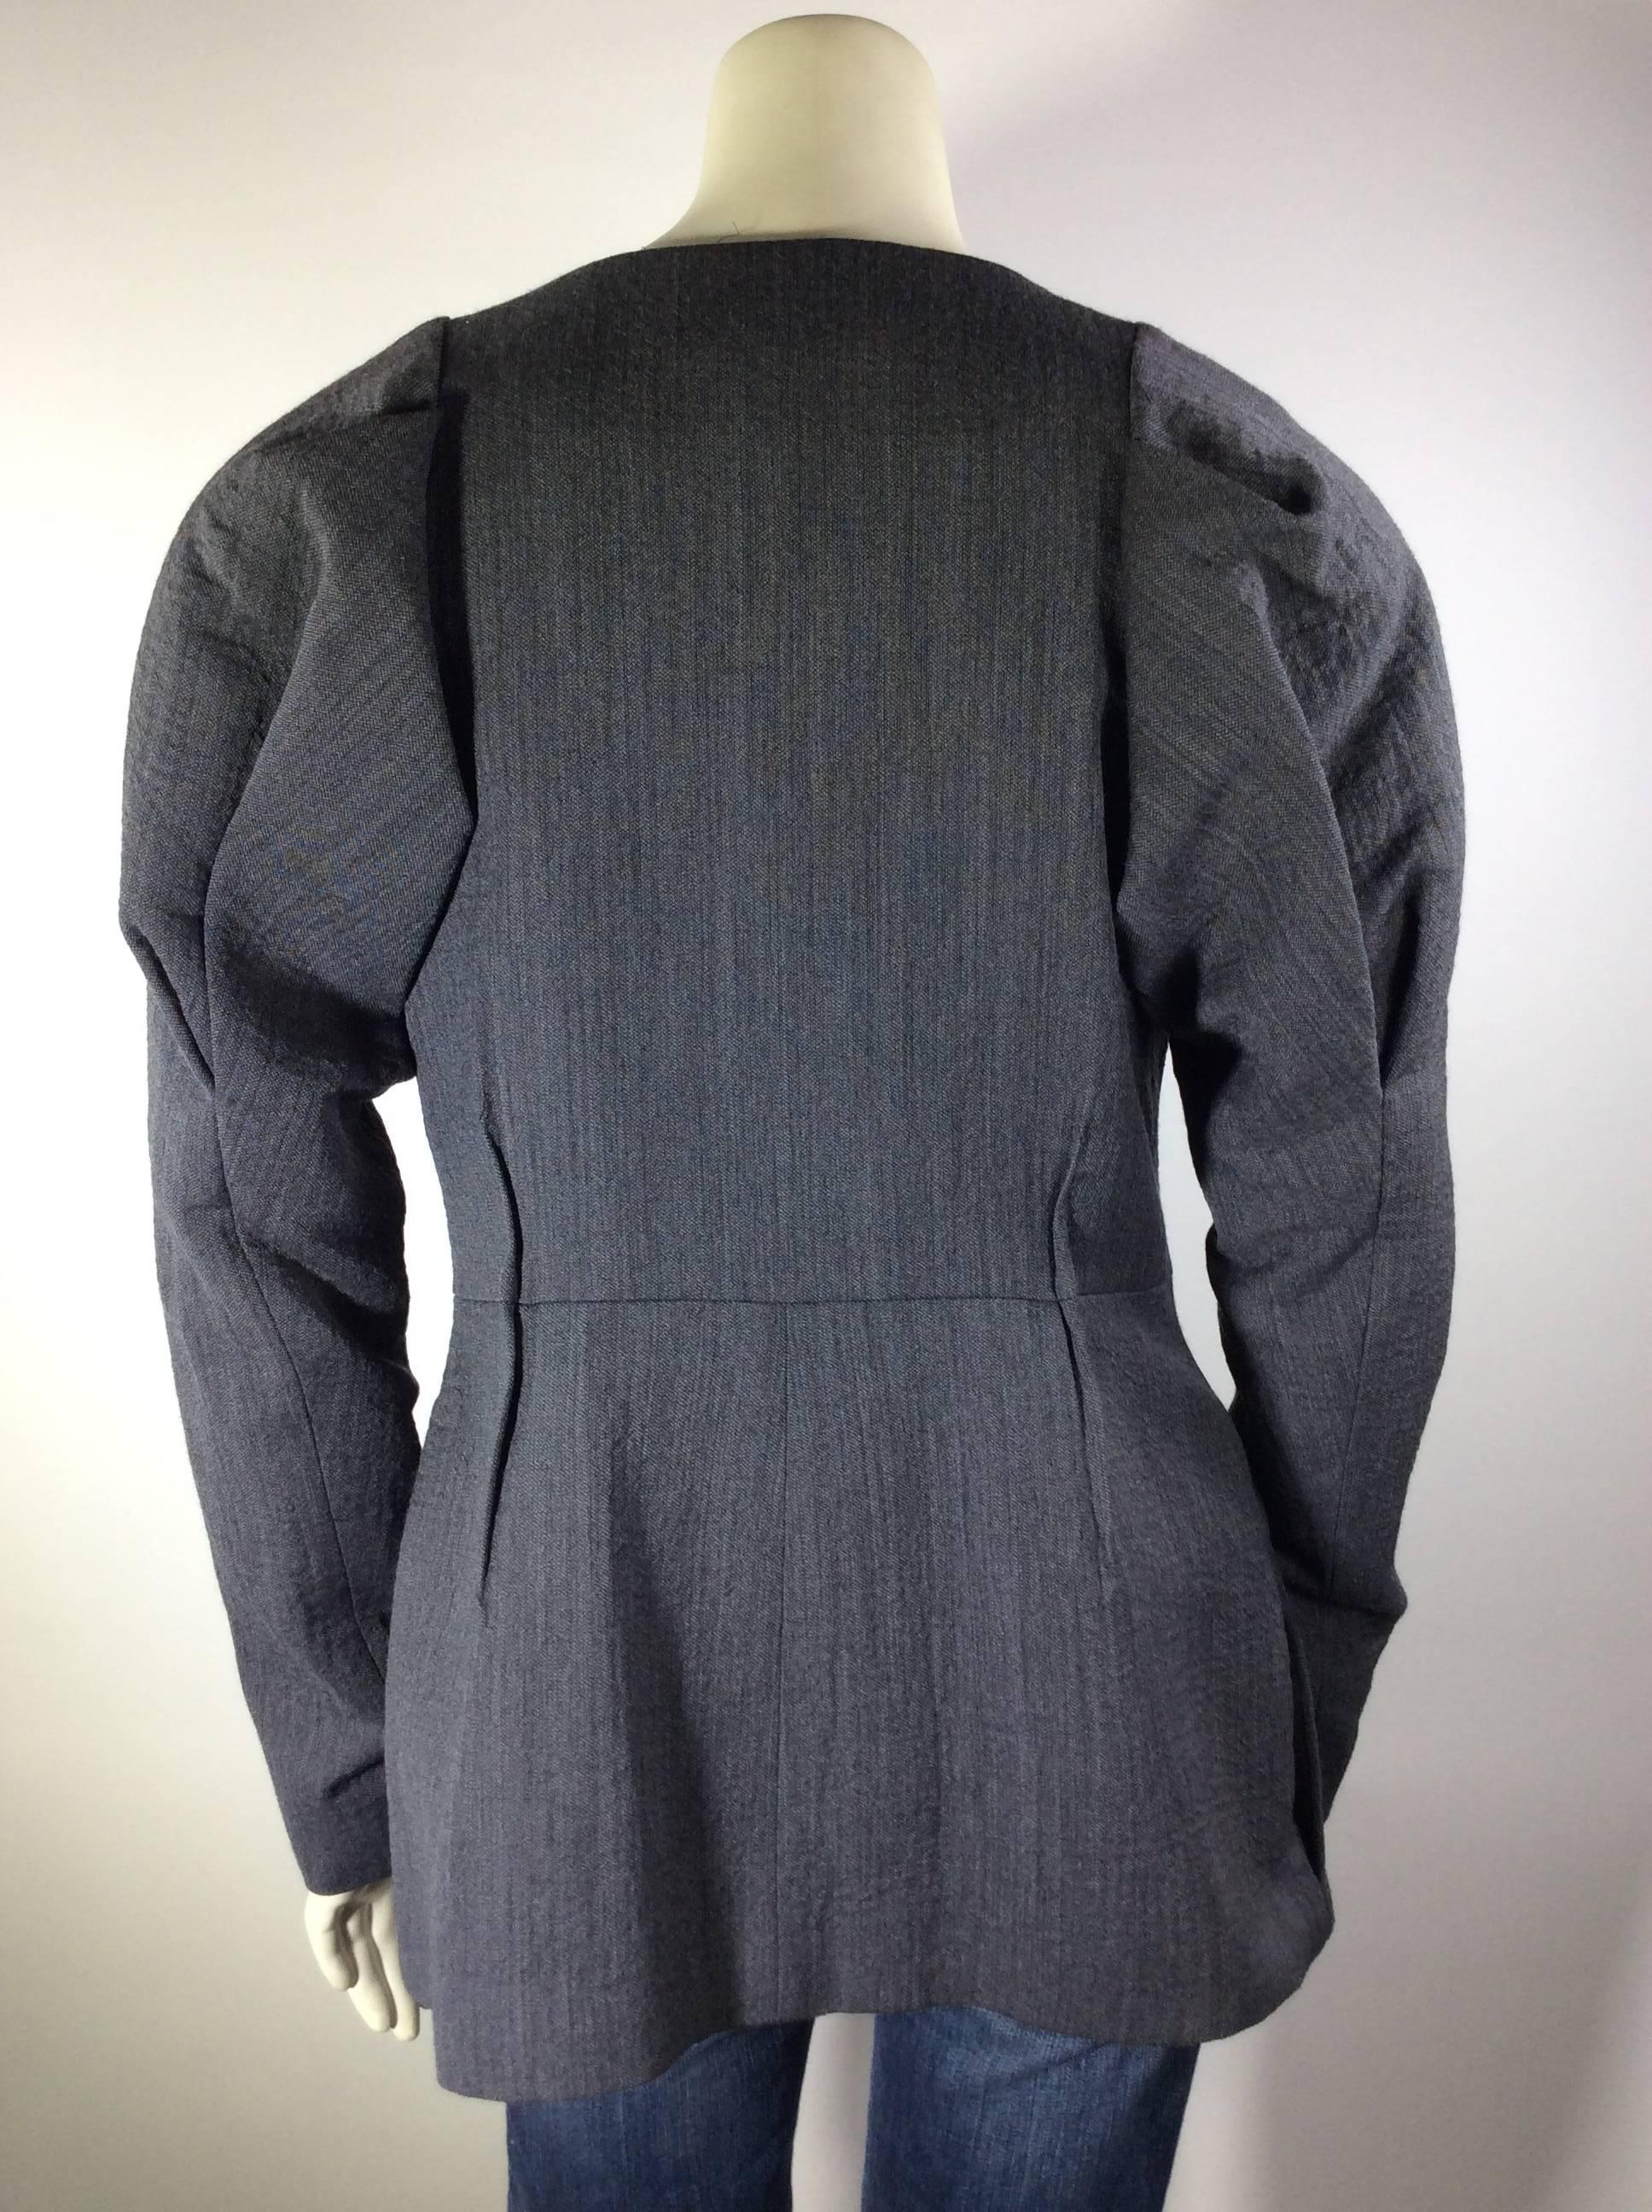 Marni Grey Blazer In Excellent Condition For Sale In Narberth, PA